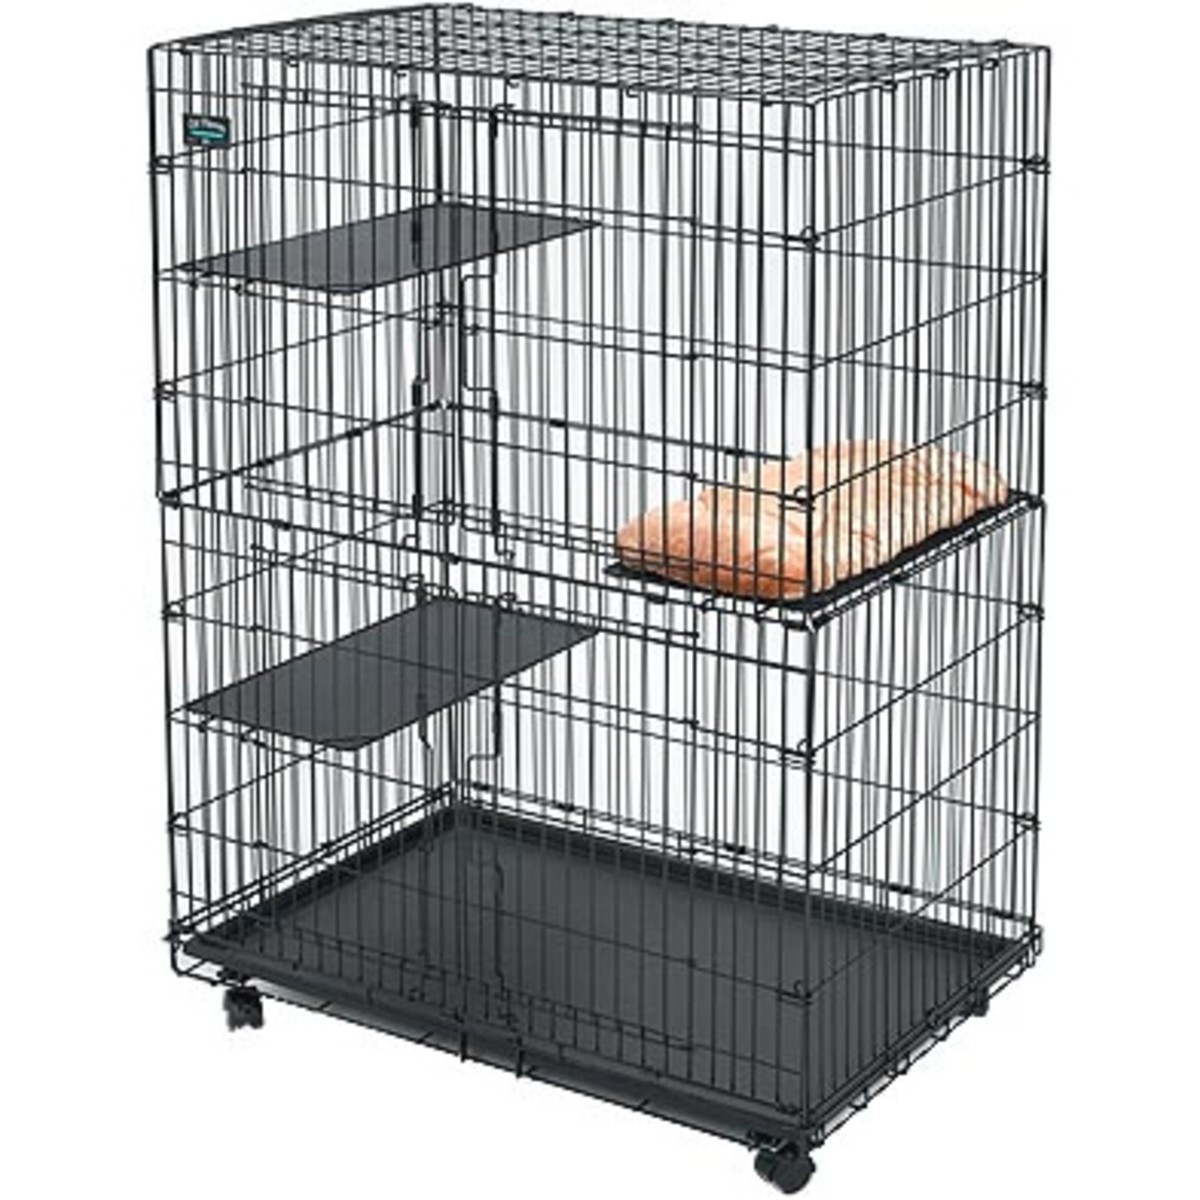 Finding the appropriate indoor or outdoor cage for your 4